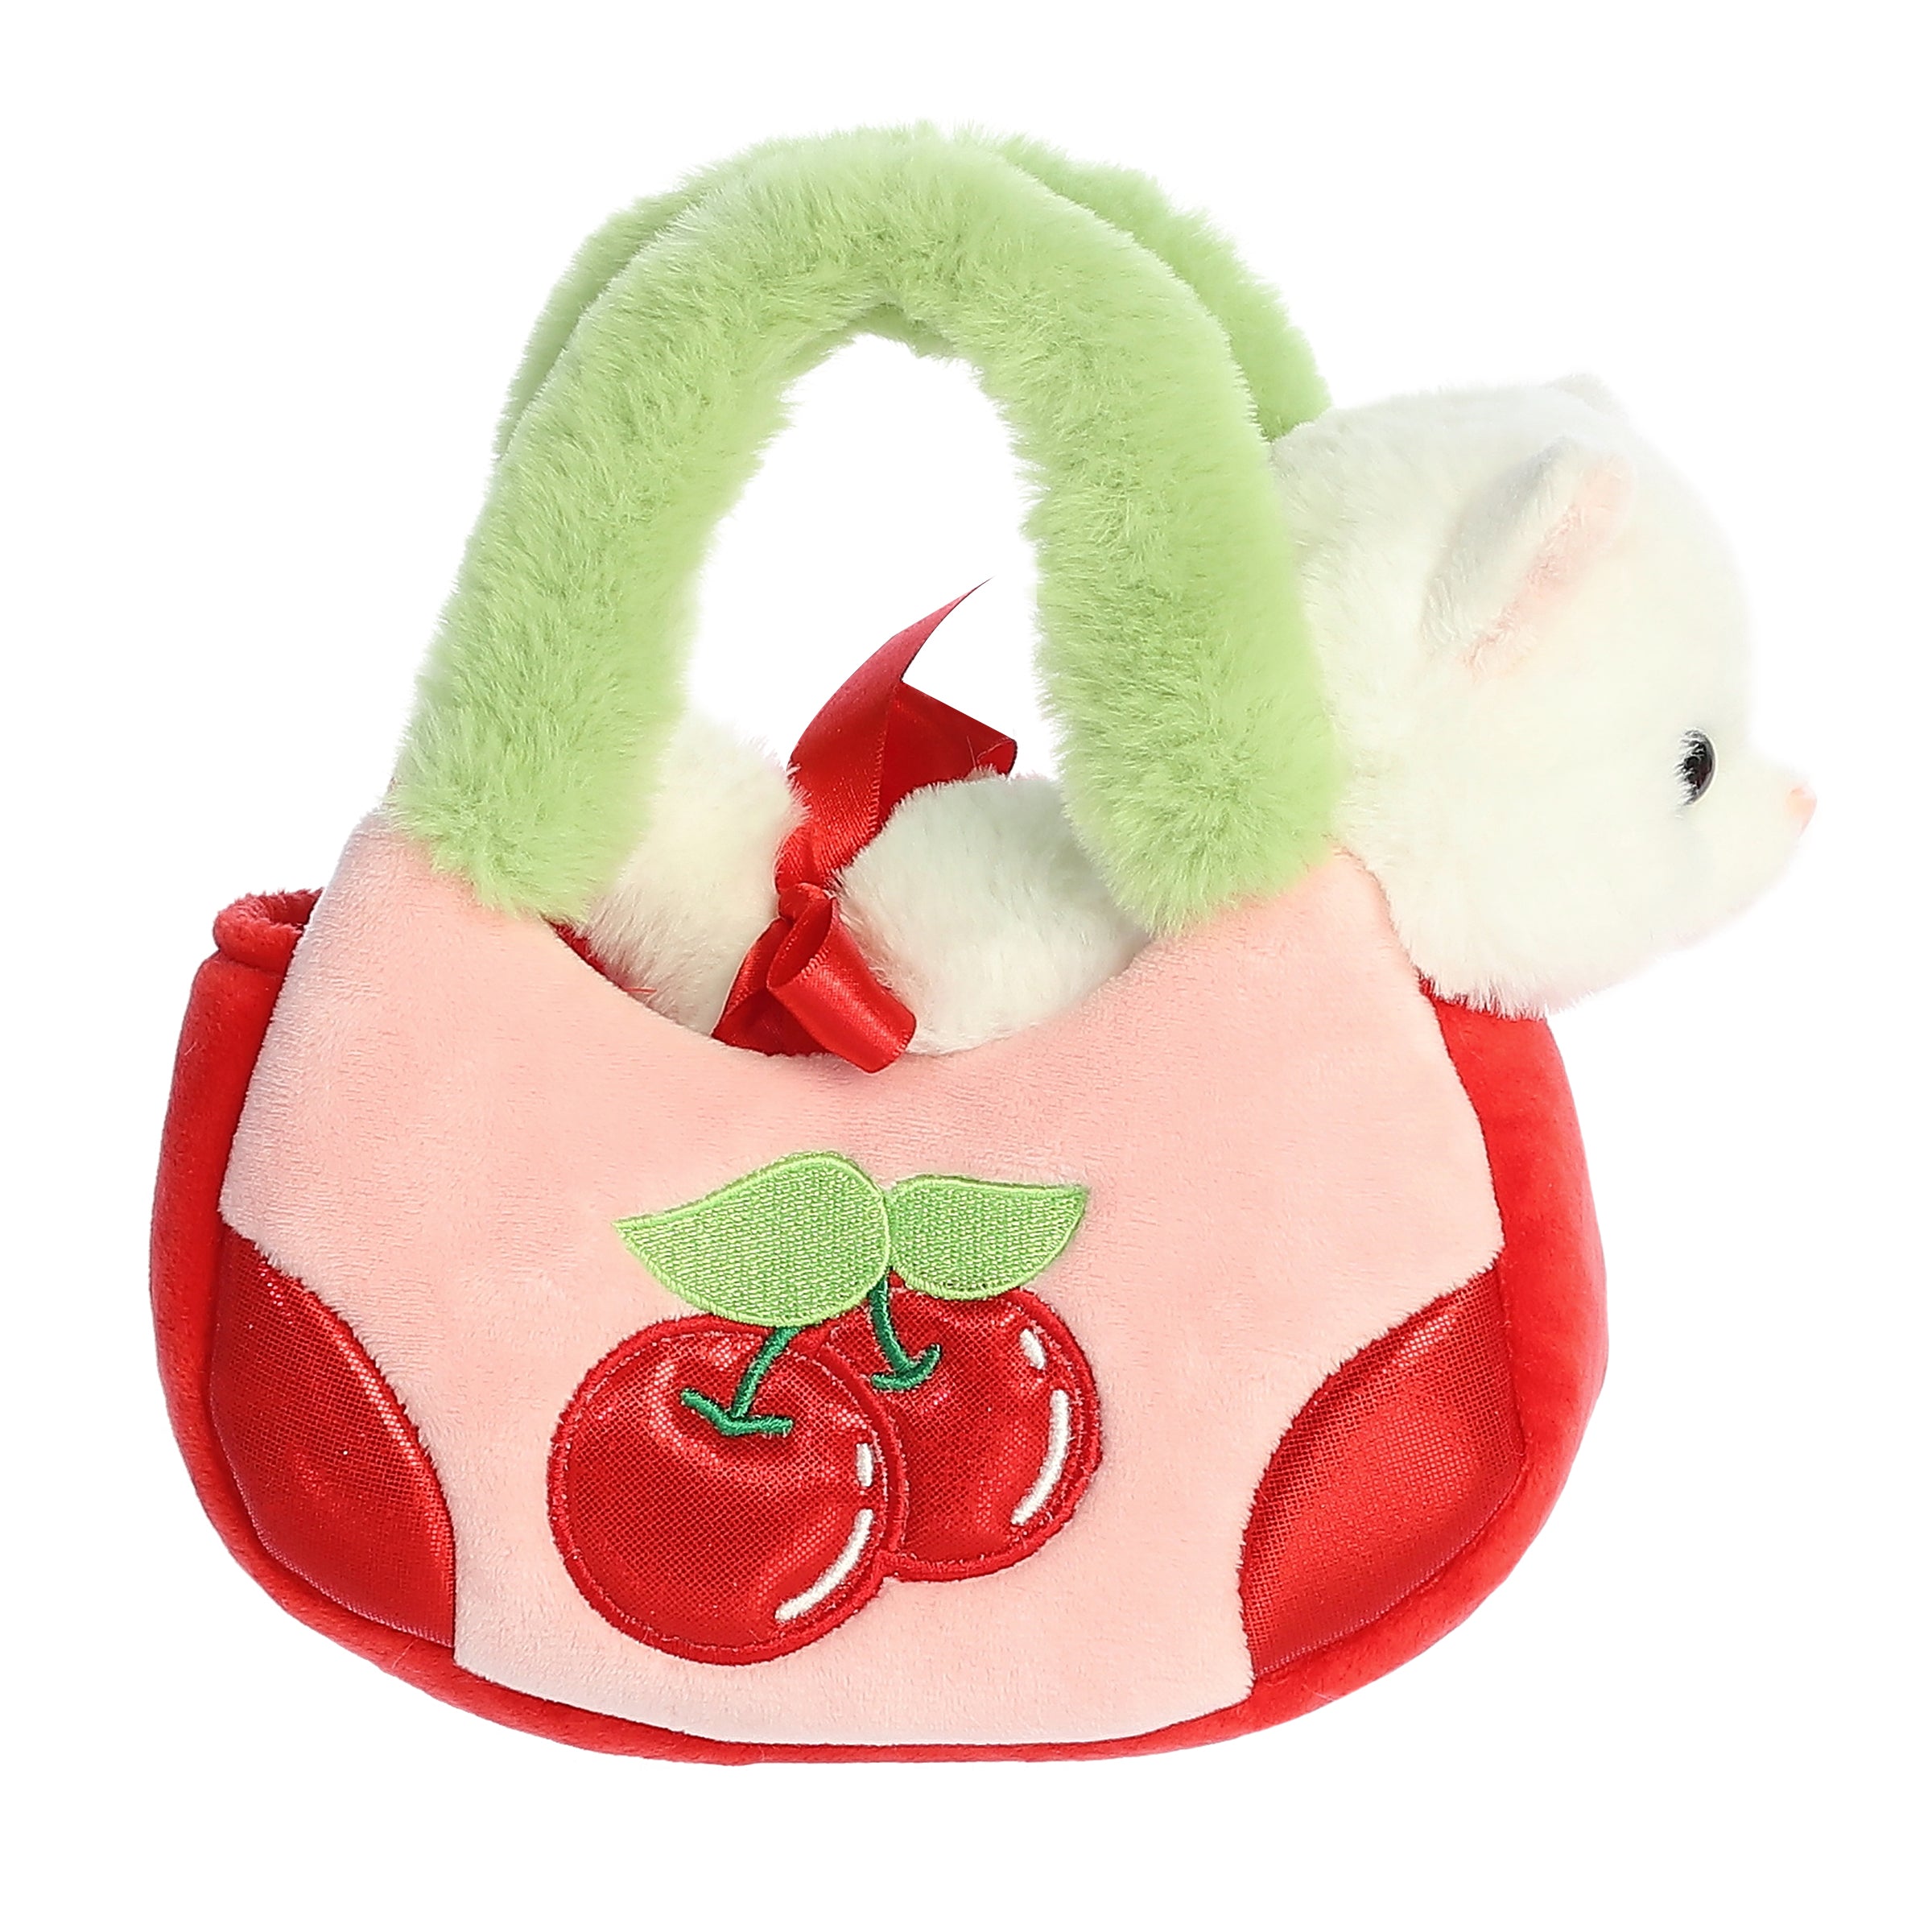 Cherry Kitten plush carrier by Aurora with a kitten stuffed animal inside, radiating fruity fun and whimsical style.